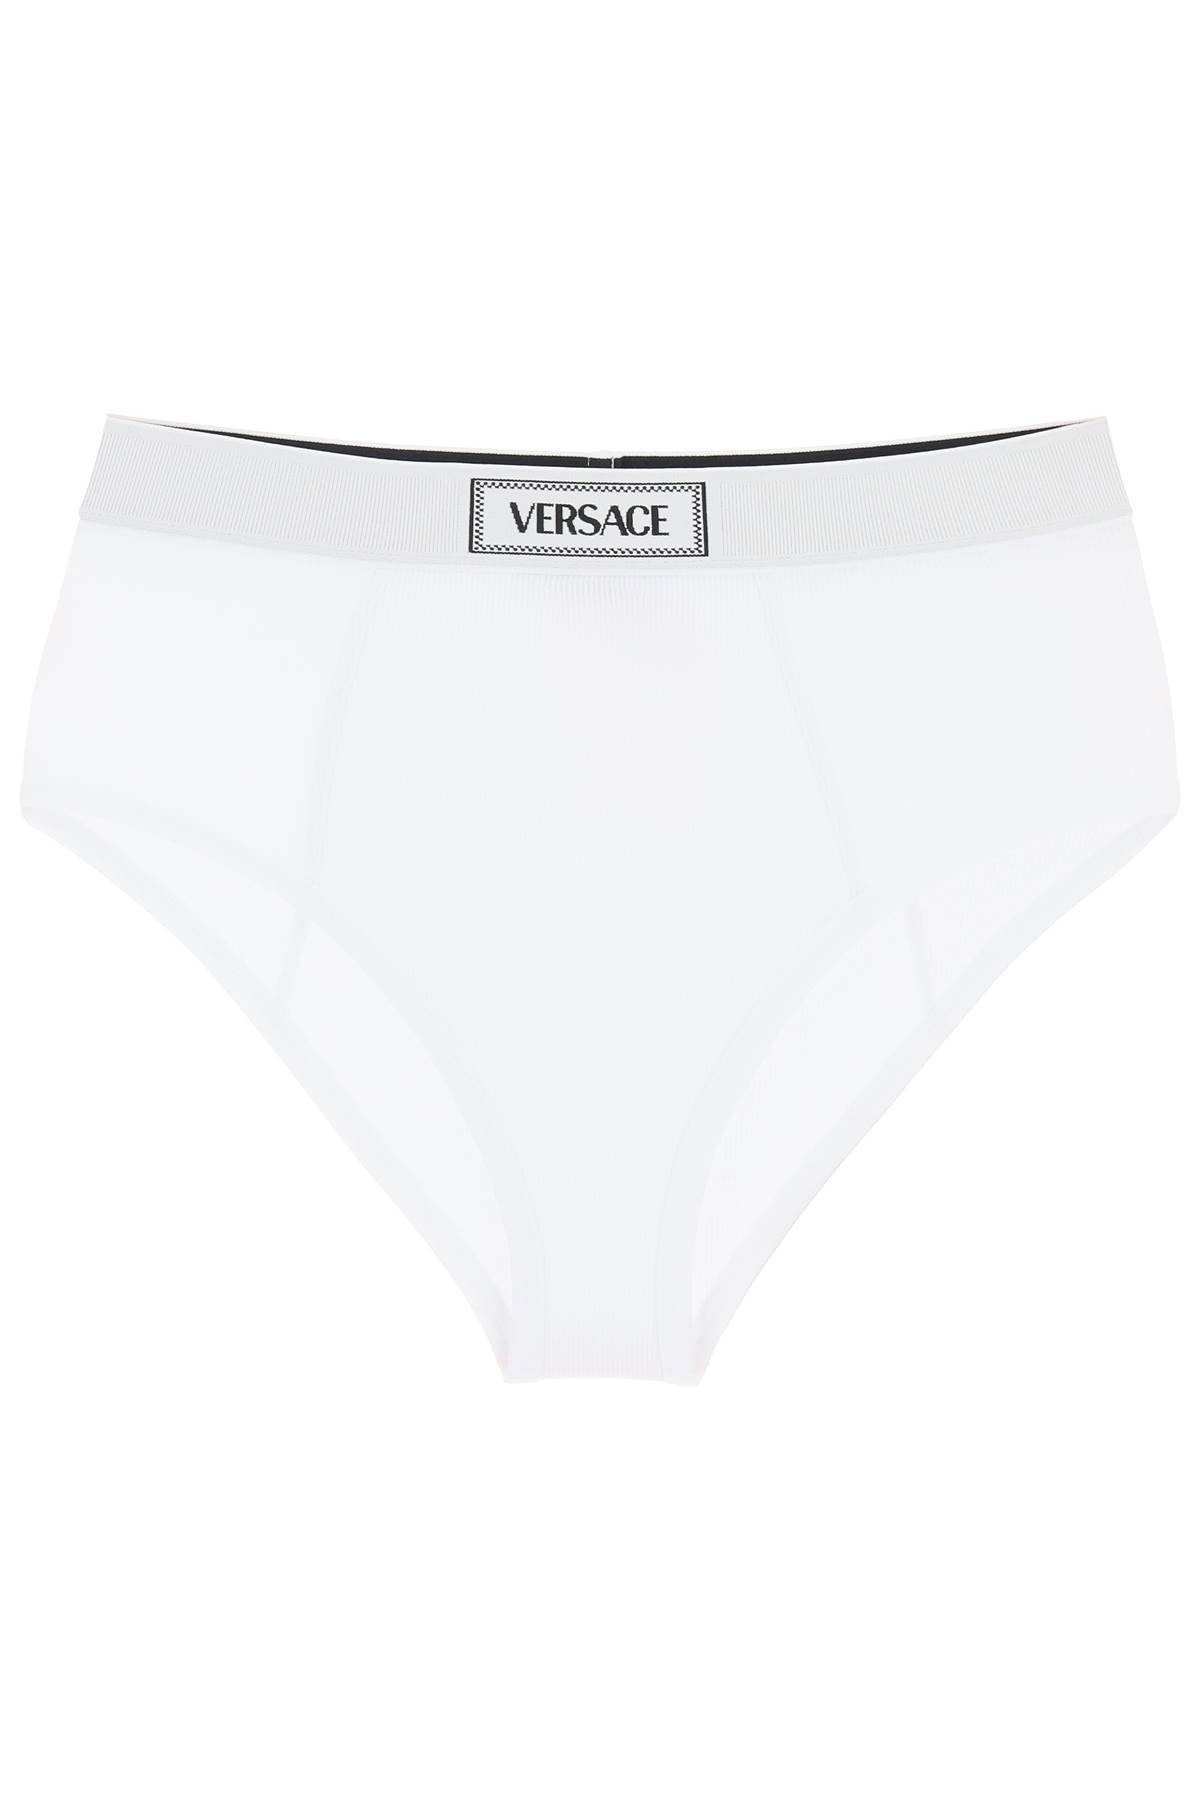 Versace VERSACE ribbed briefs with '90s logo